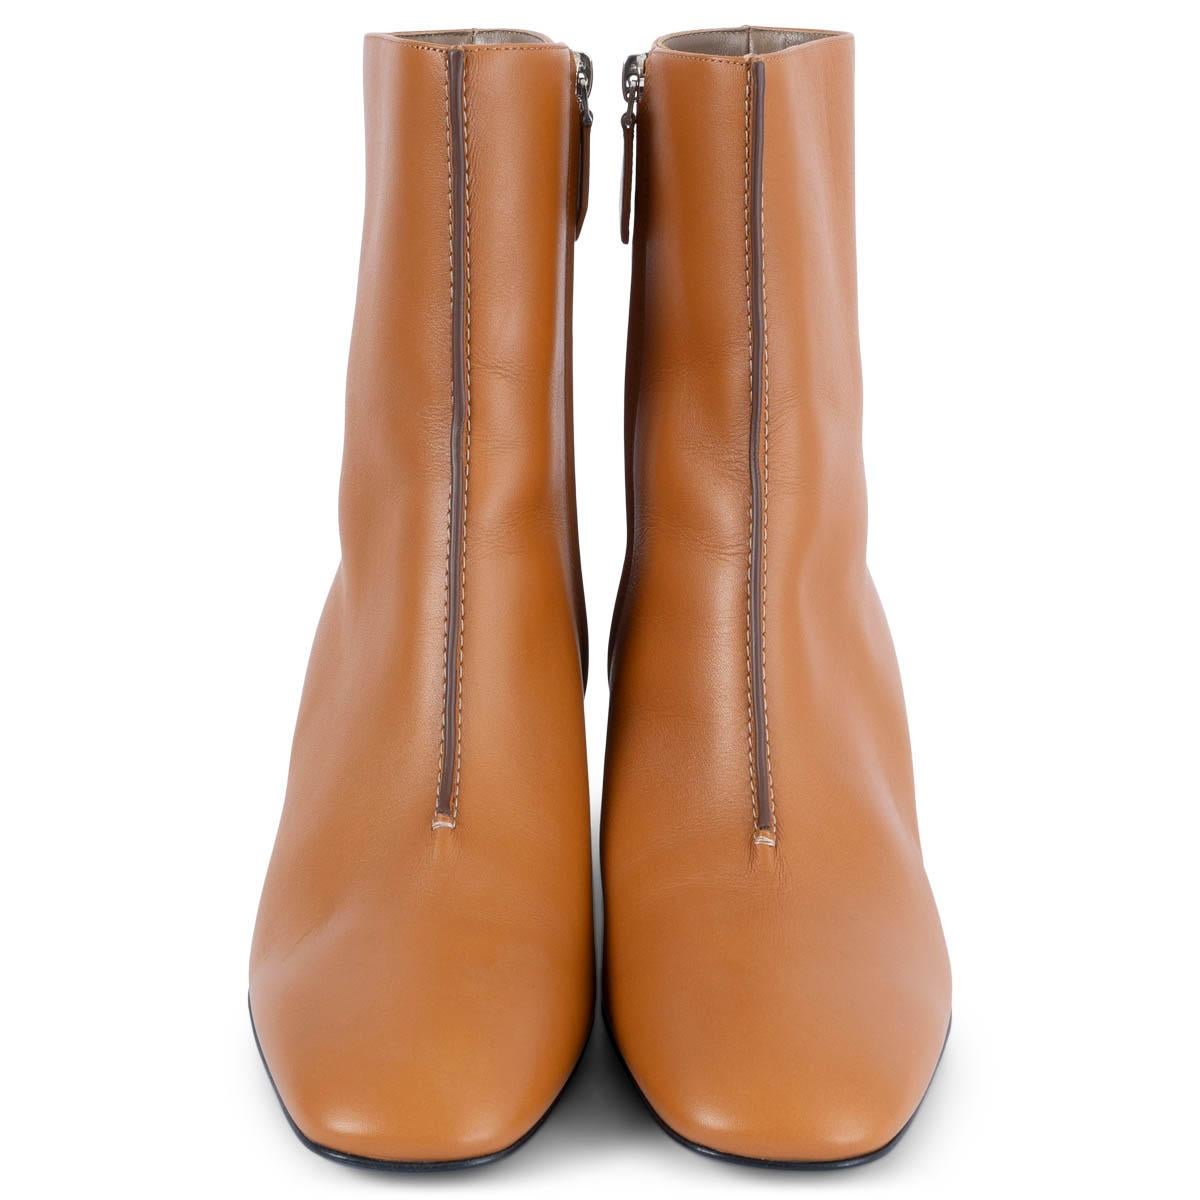 100% authentic Hermès Dedale ankle boots in Beige Dore (camel brown) calfskin leather. Feature a block heel, painted edges and contrast stitching. Open with a zipper on the inside. Lined in goatskin leather. Brand new.